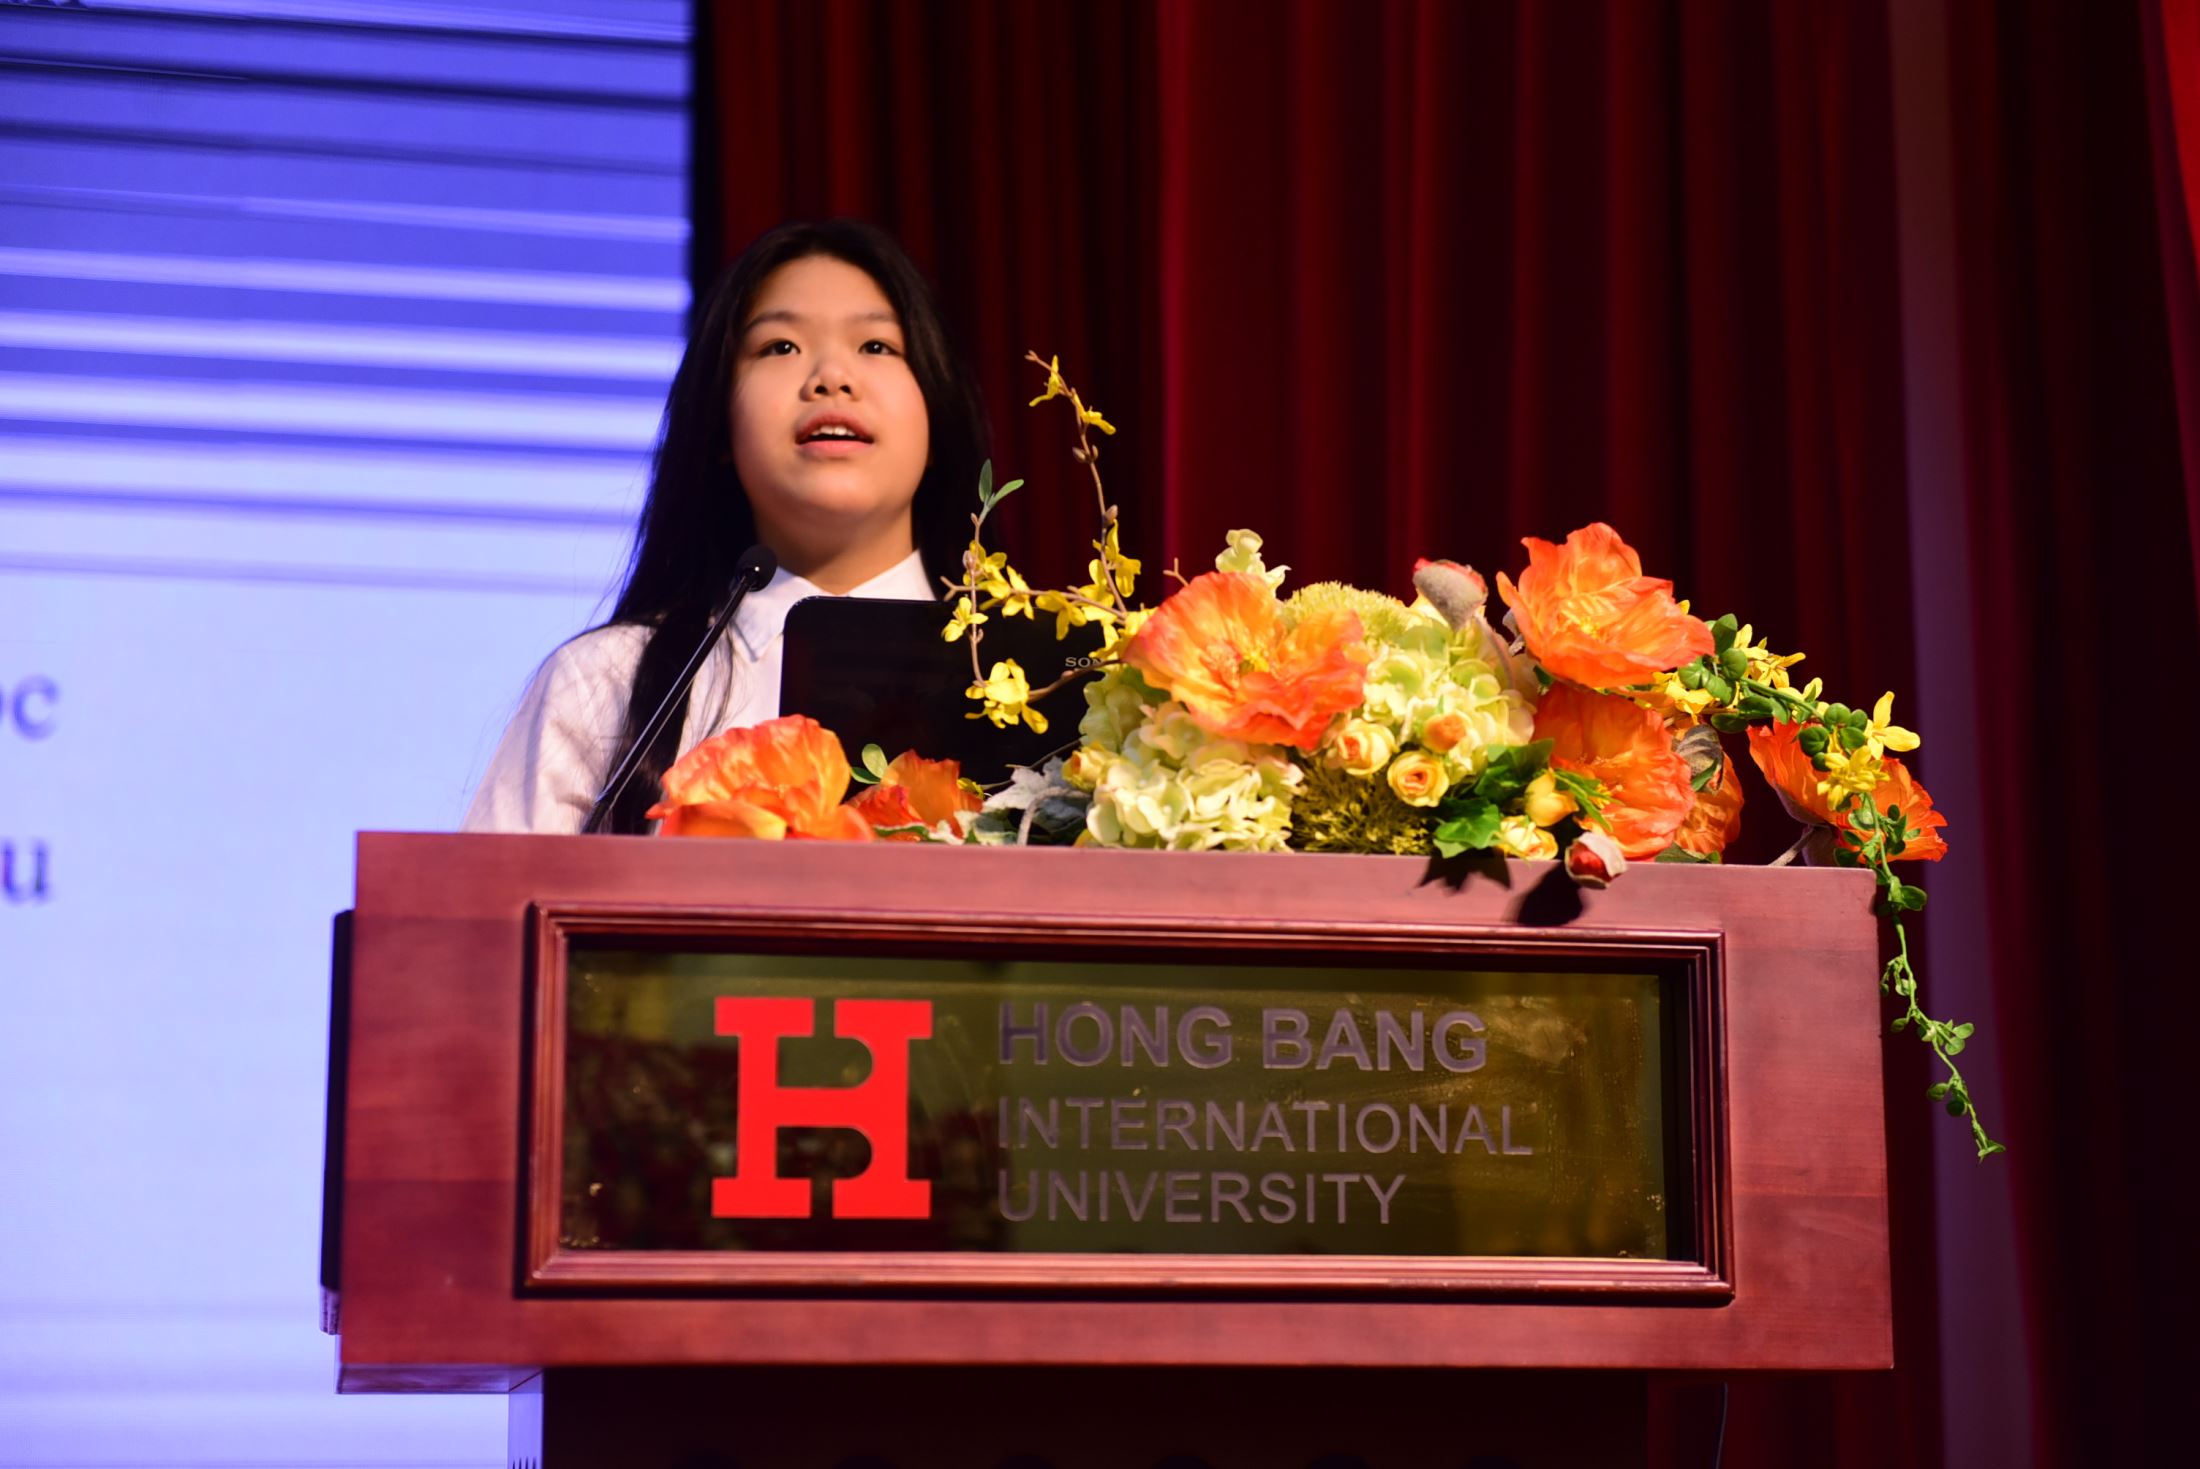 “If a mother is called the soul of a family, then a great teacher is the soul of an amazing class” – Truong Hoang Bao Thu (Cindy), student of class 9, SNA, representing for students in the system, expresses her appreciation toward the teachers